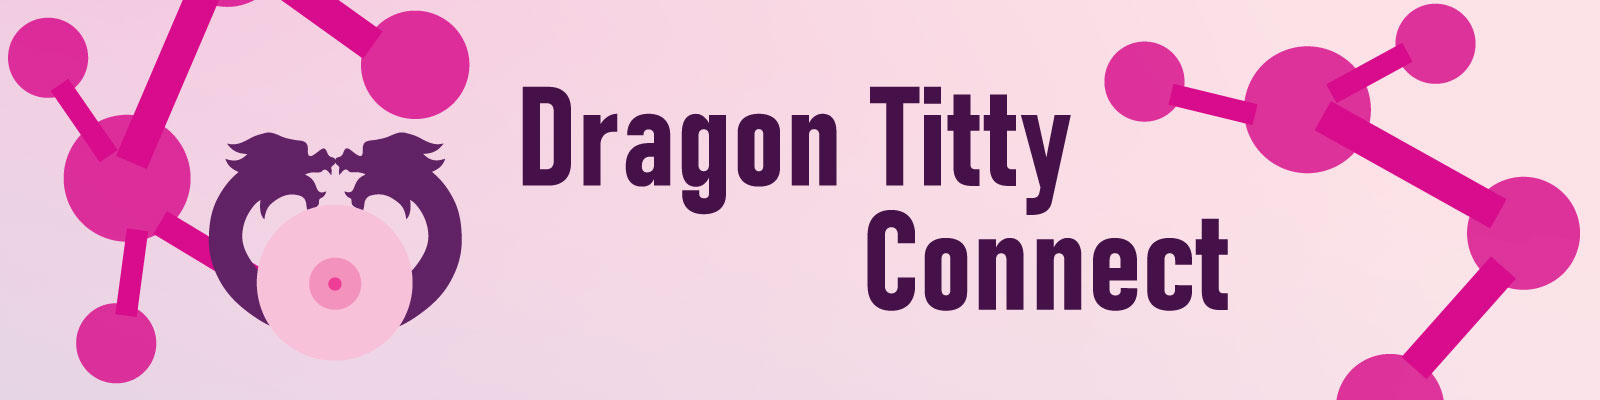 Dragontitty Connect